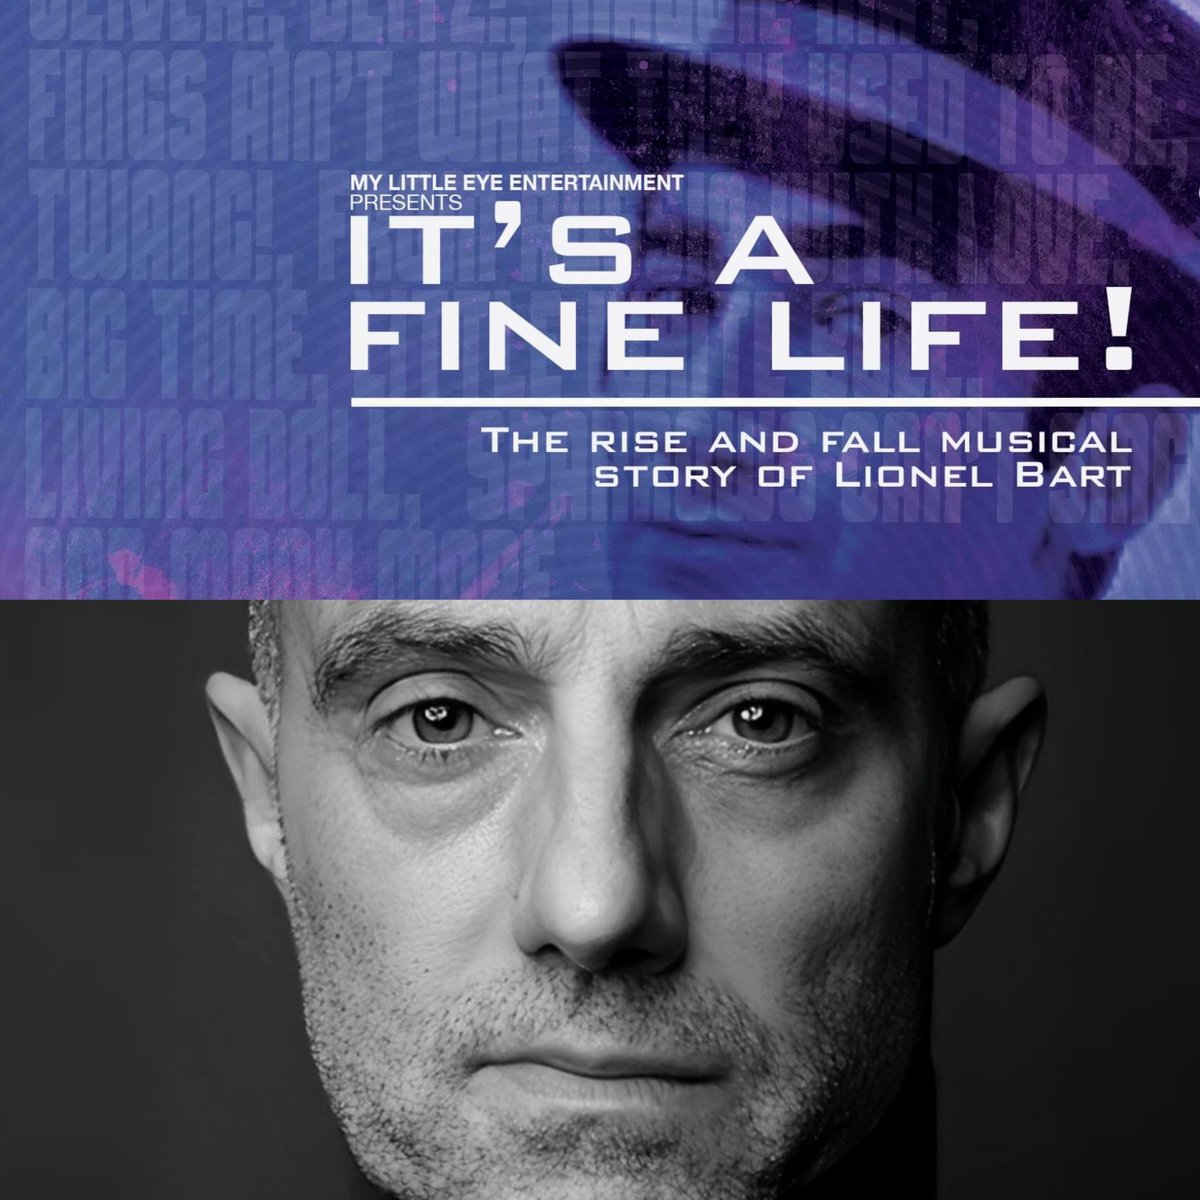 NEWS: ⭐ IT’S A FINE LIFE! – THE TRUE RISE AND FALL MUSICAL STORY OF LIONEL BART ANNOUNCED FOR QUEEN’S THEATRE HORNCHURCH – STARRING JOHN BARR ⭐ Read more - theatrefan.co.uk/its-a-fine-lif…